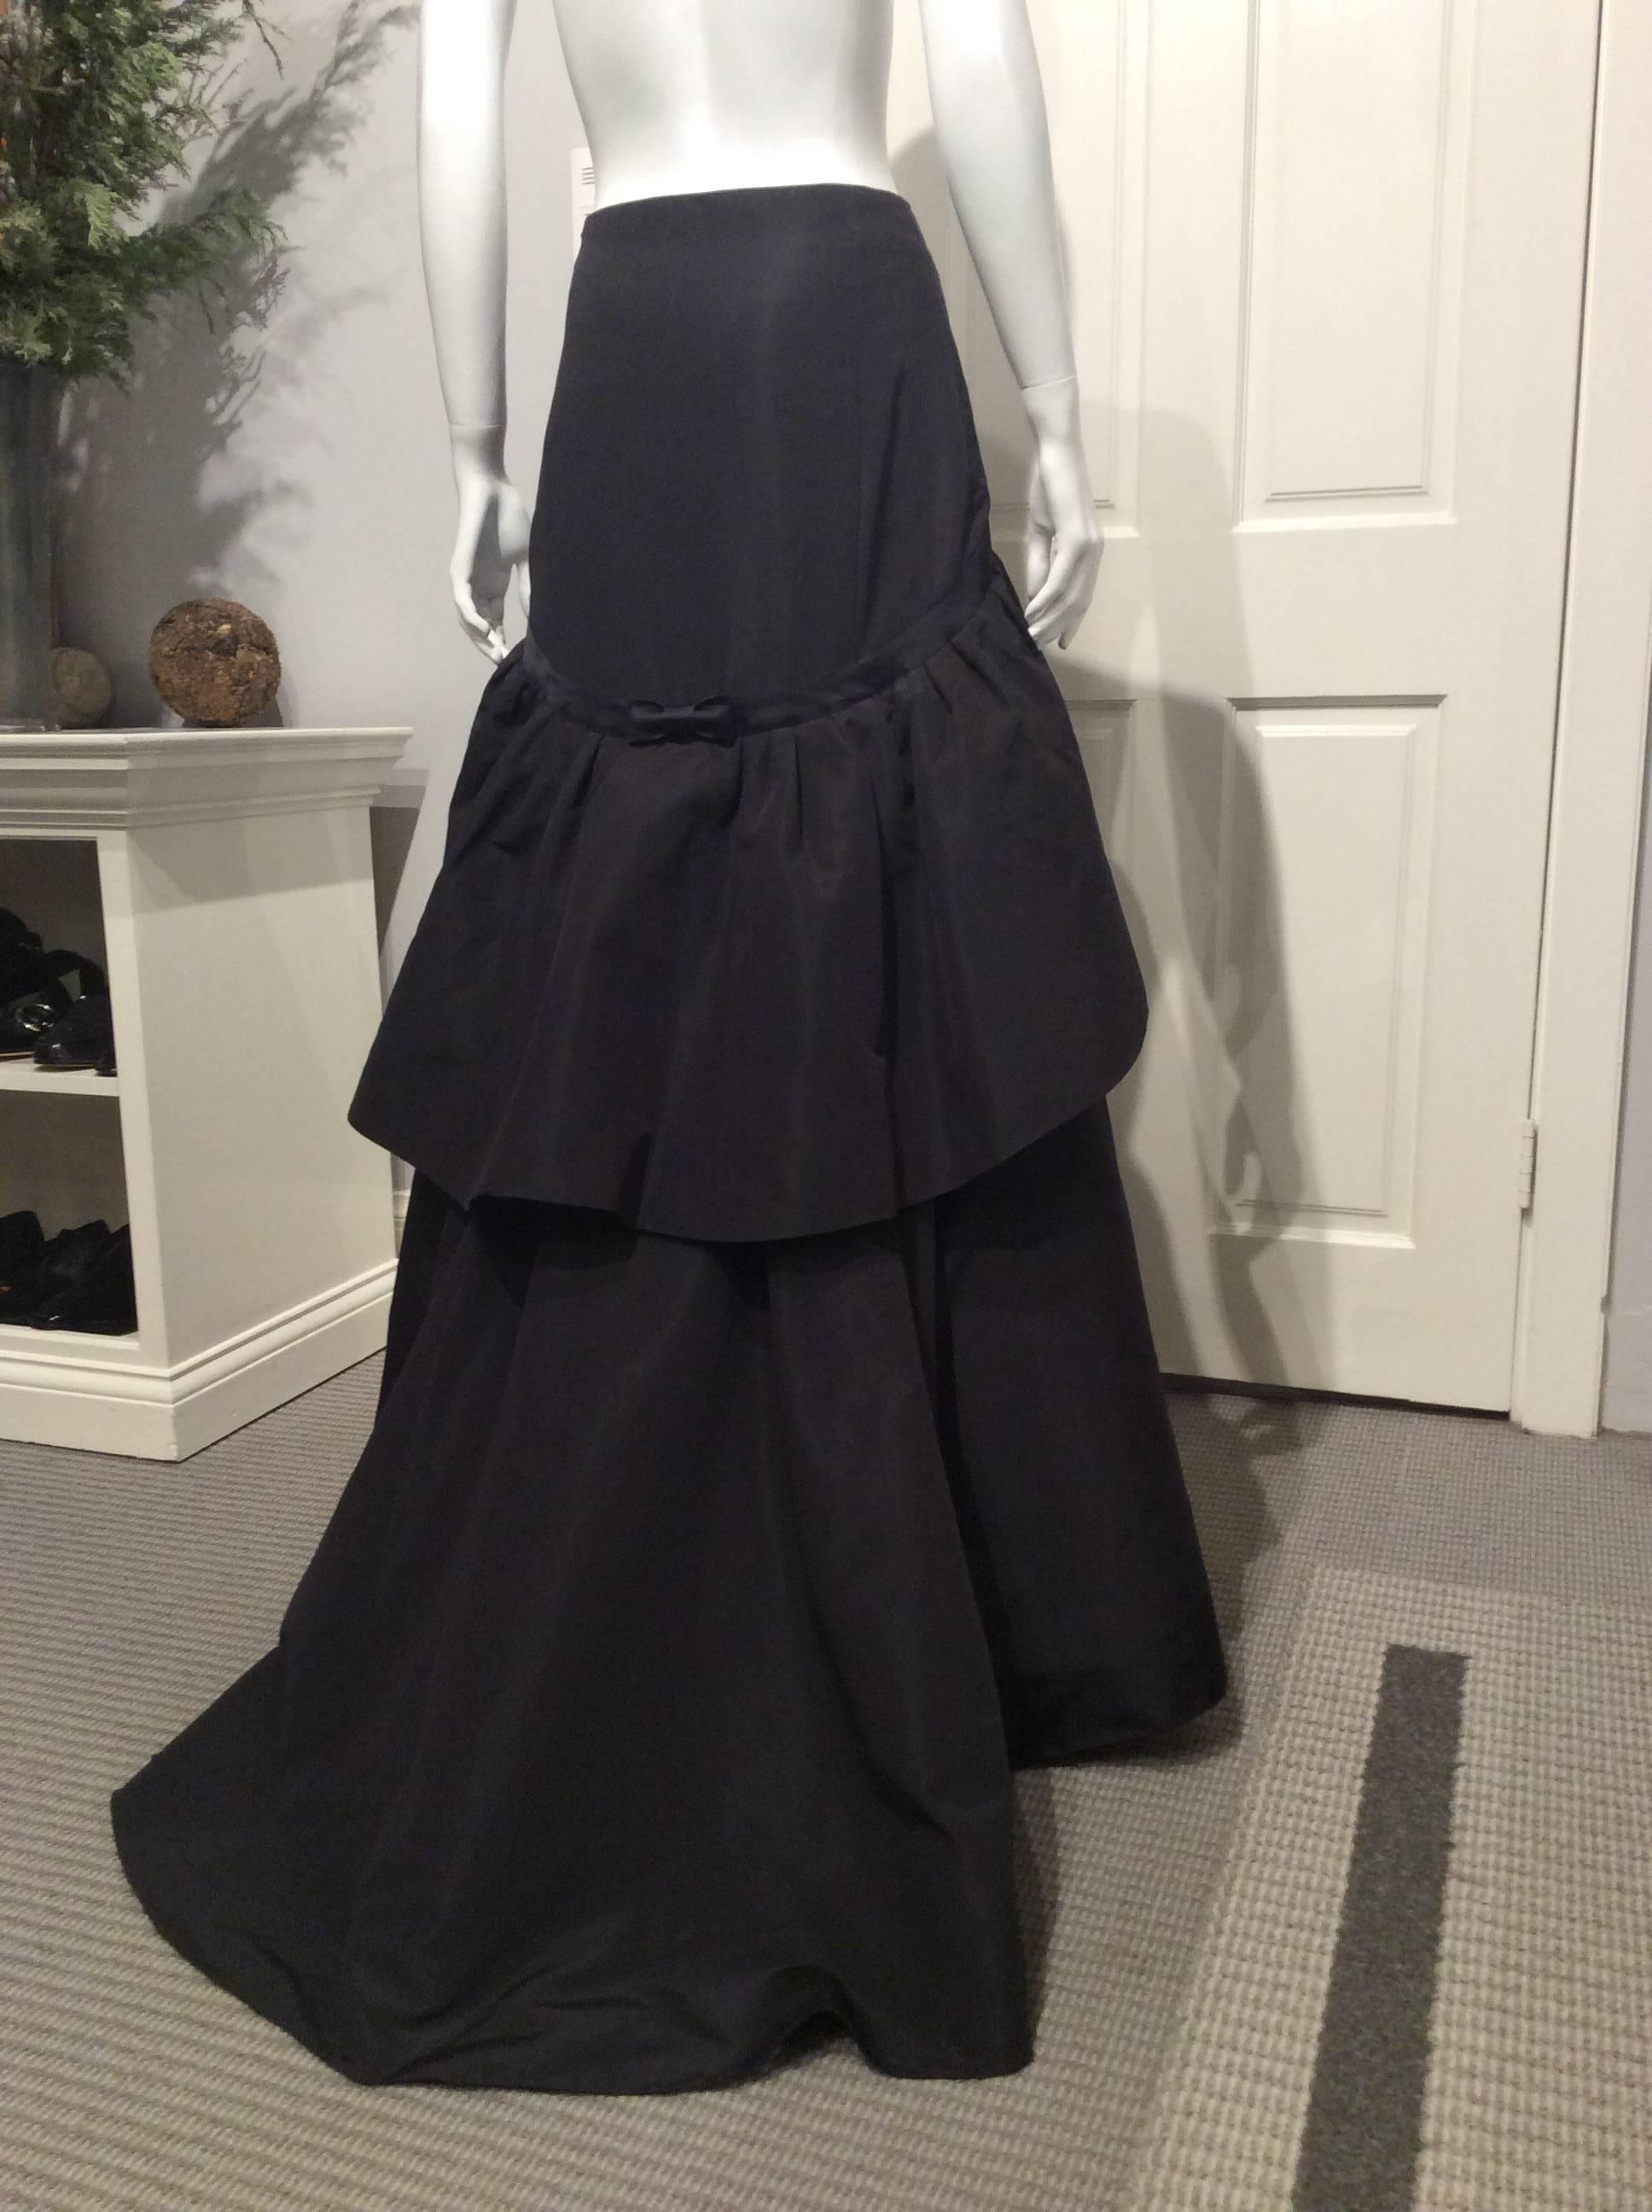 Rochas multilayered long taffeta skirt with a slight train. It has inside shorter layers and whalebone trim to give the skirt extra fullness. A 1in satin trim with a flat bow in the back separates the fitted part from the full part.